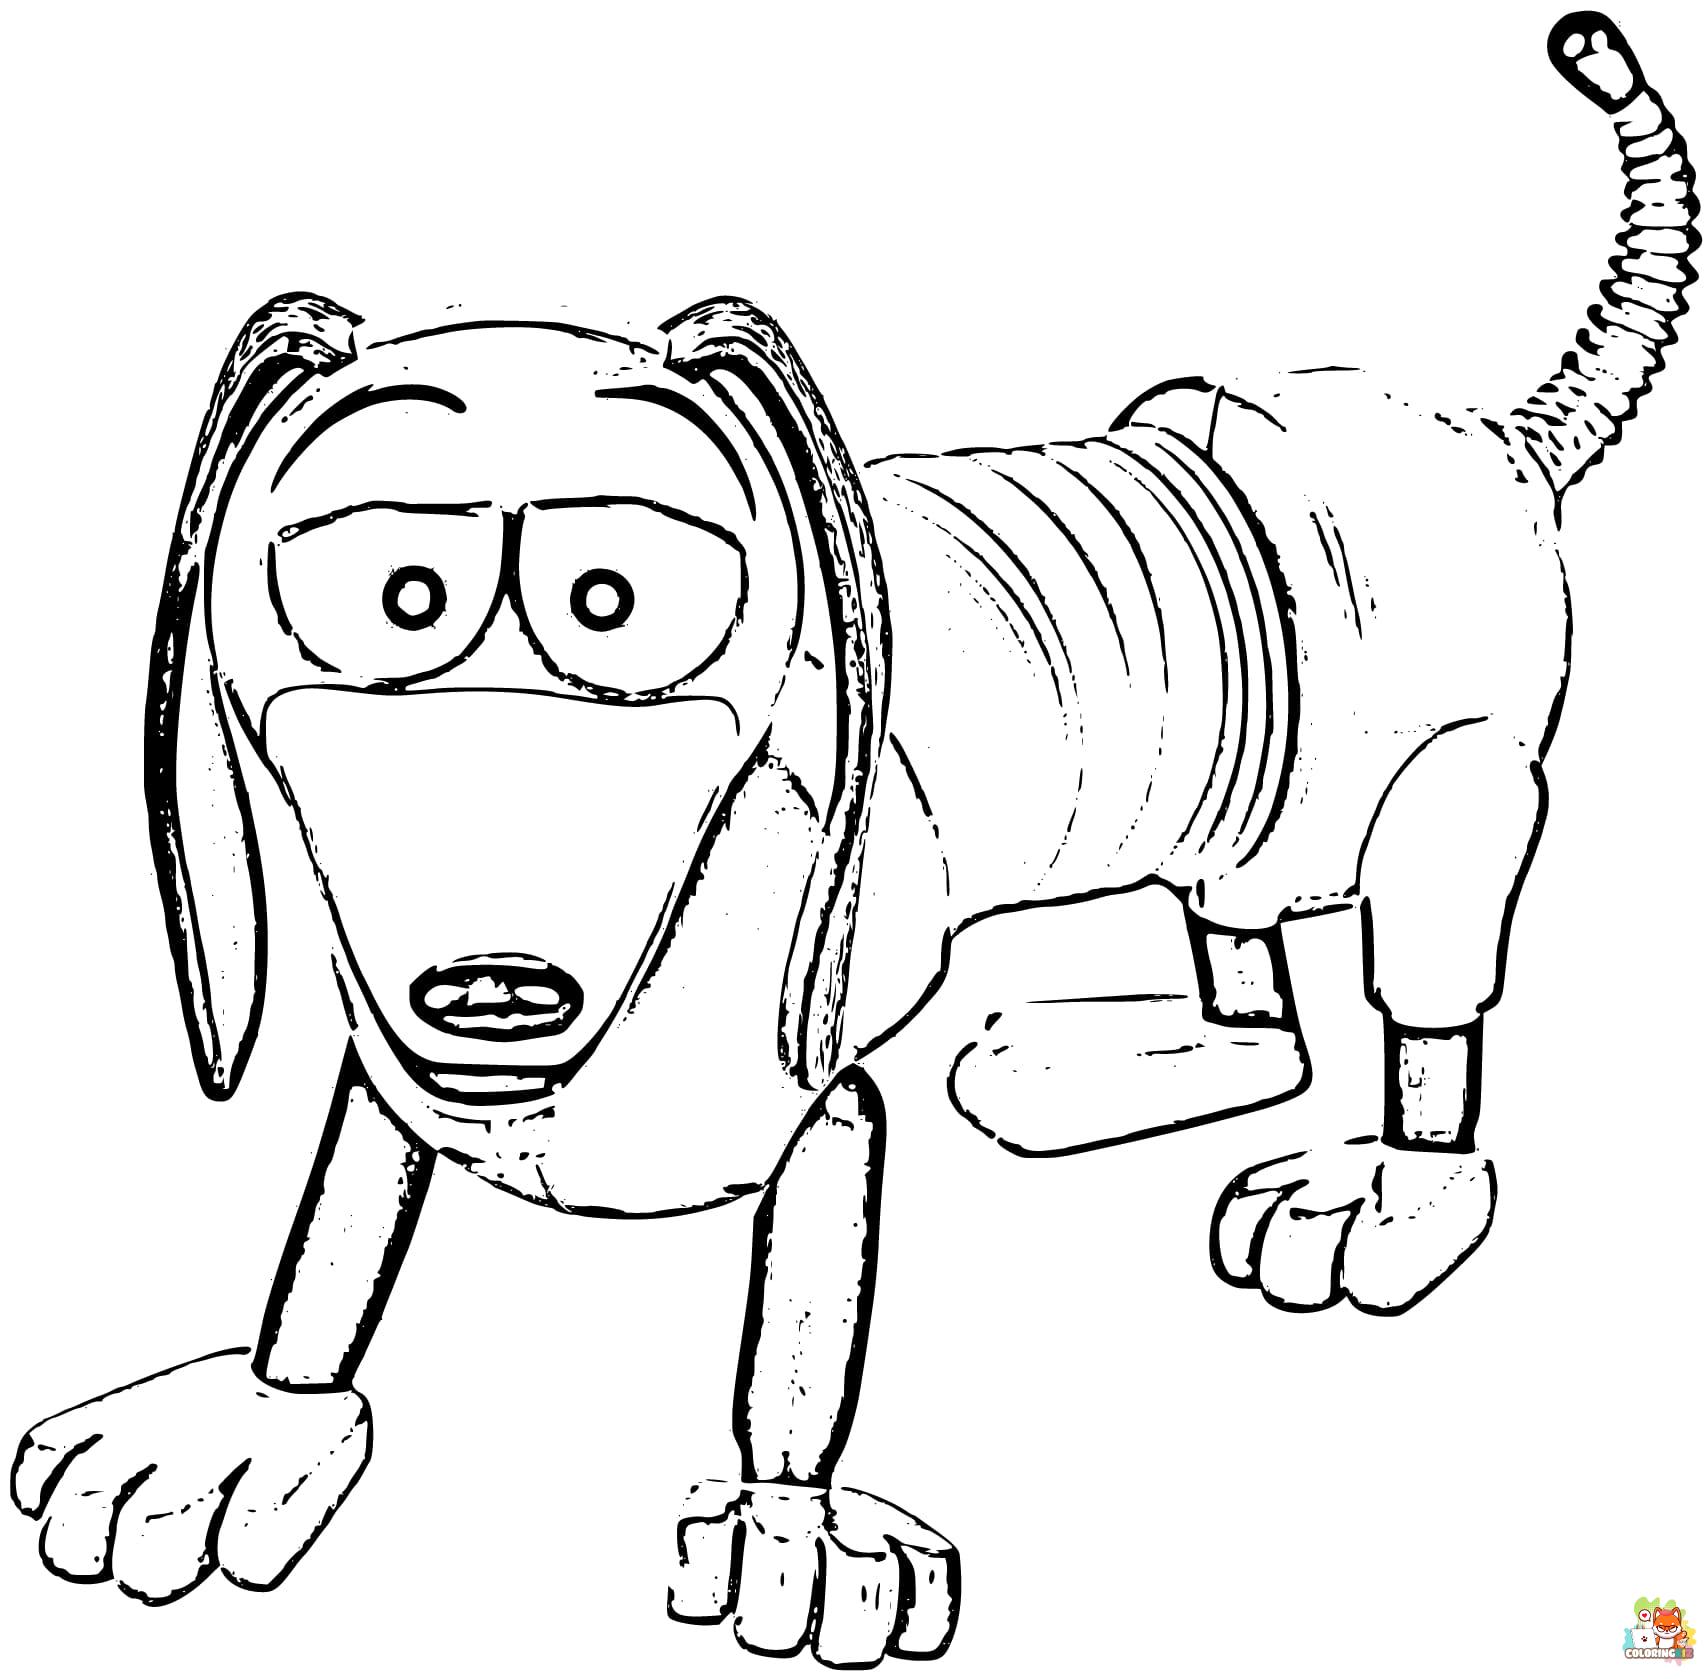 Toy Story coloring pages free